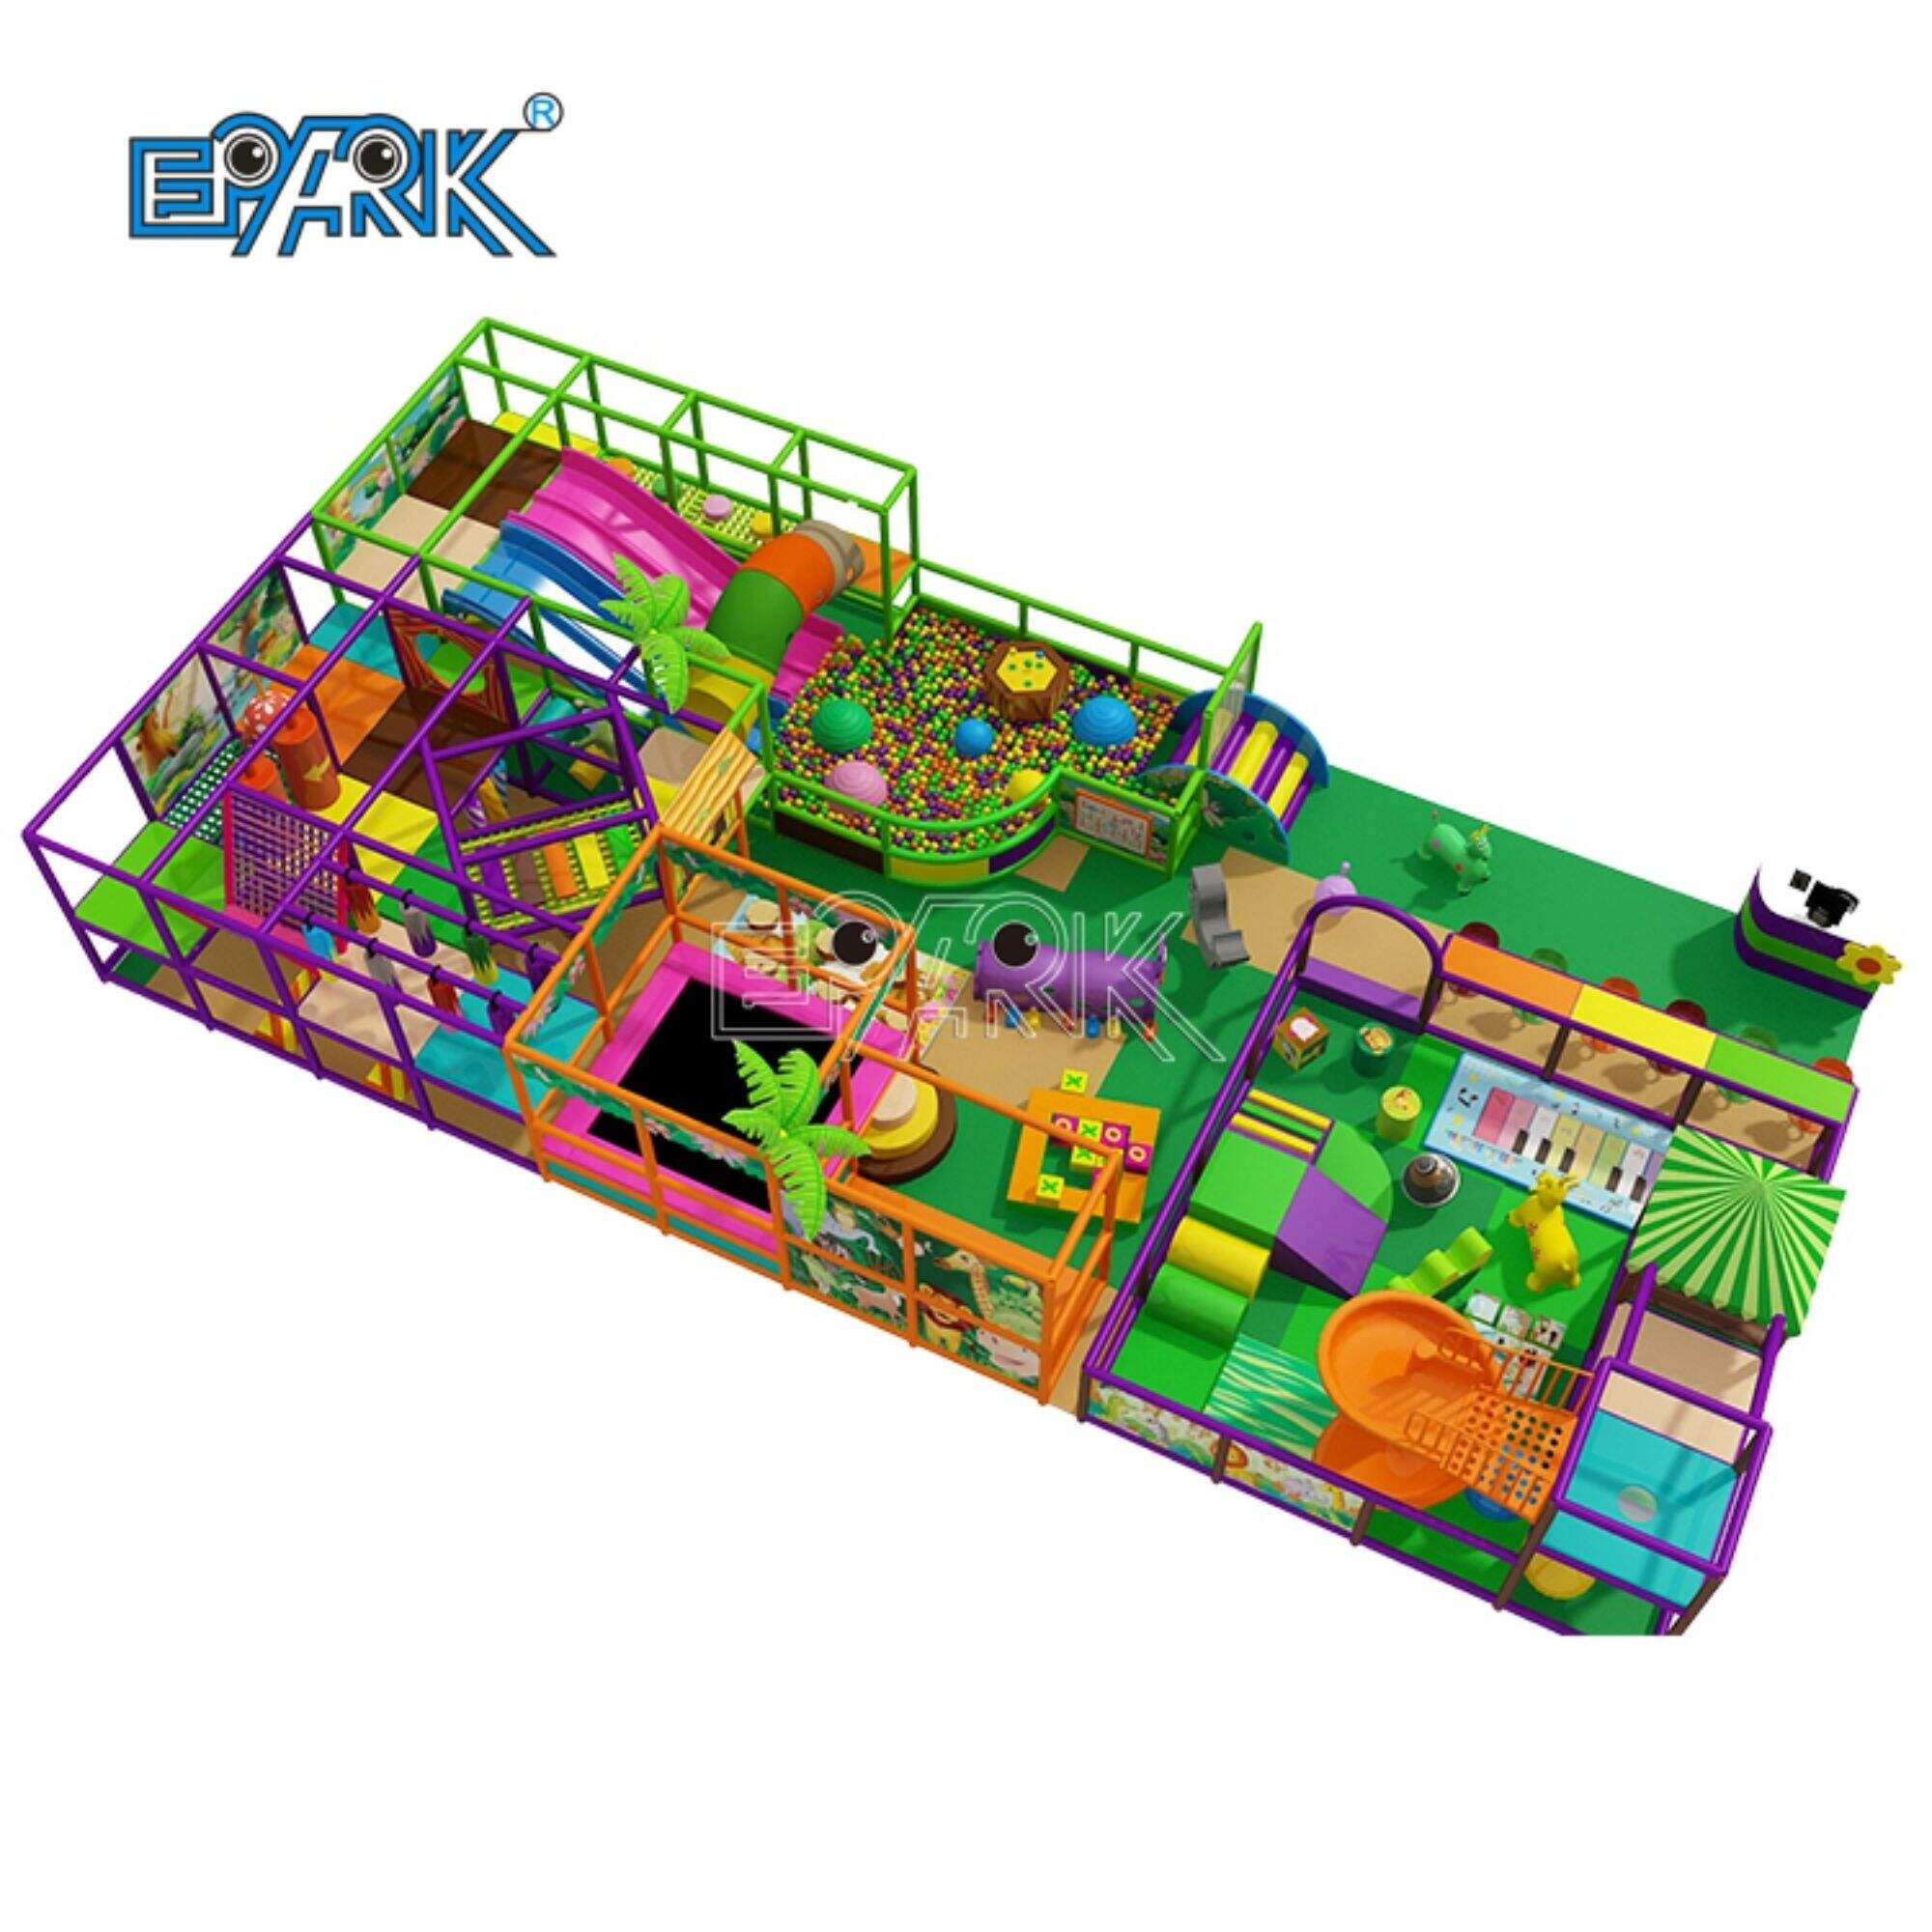 Soft Indoor Play Equipment Kid Large Indoor Kids Playground Equipment For Kids Manufacturer With Slide And Ball Pool